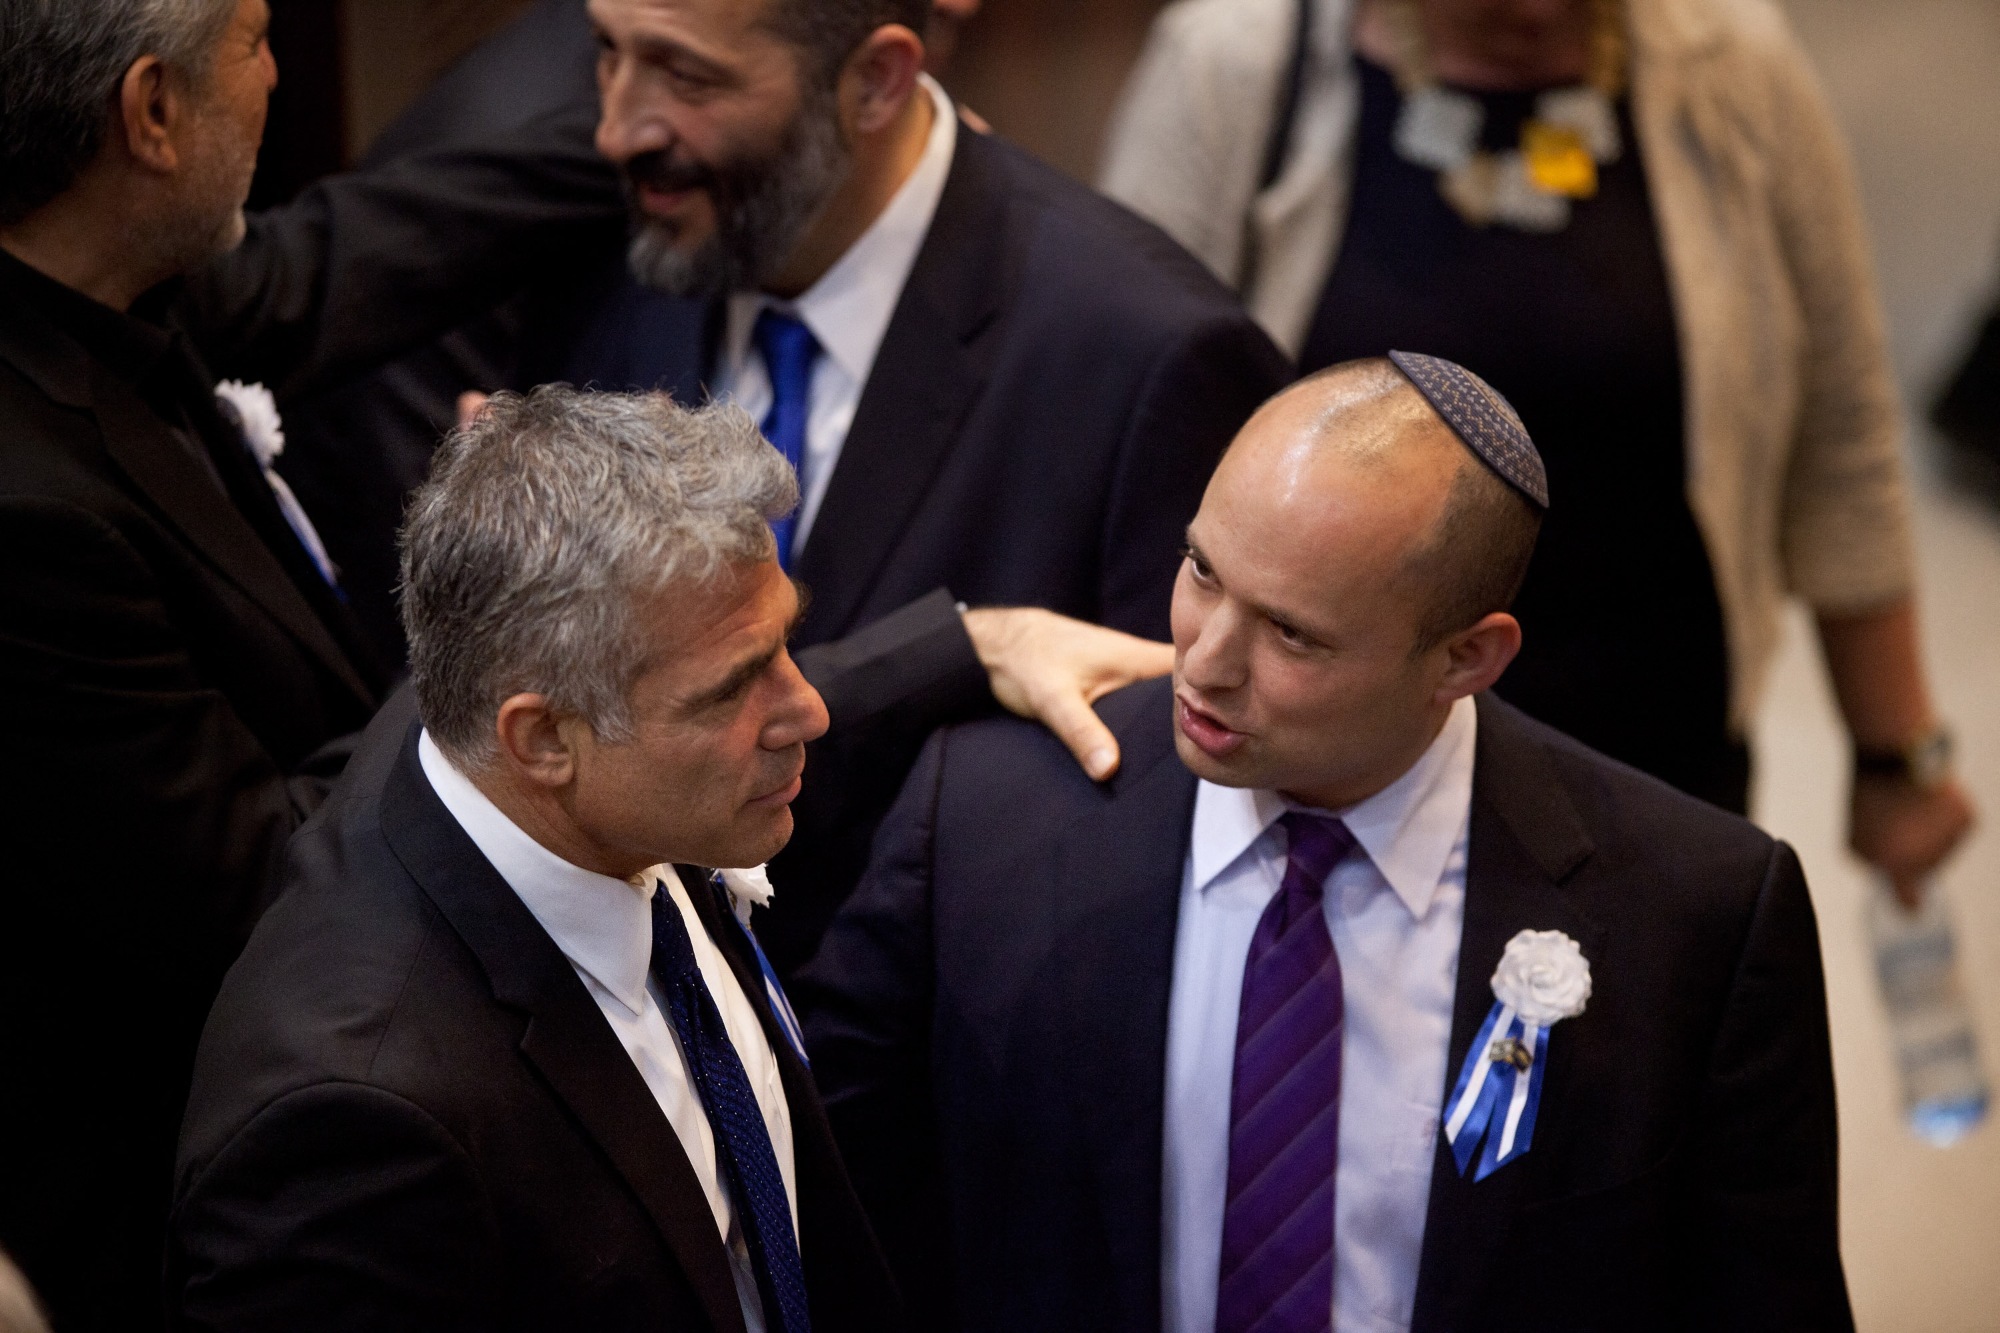 Yair Lapid, left, embraces Naftali Bennett during a reception marking the opening of the19th Knesset on 5 February 2013 in Jerusalem (AFP)